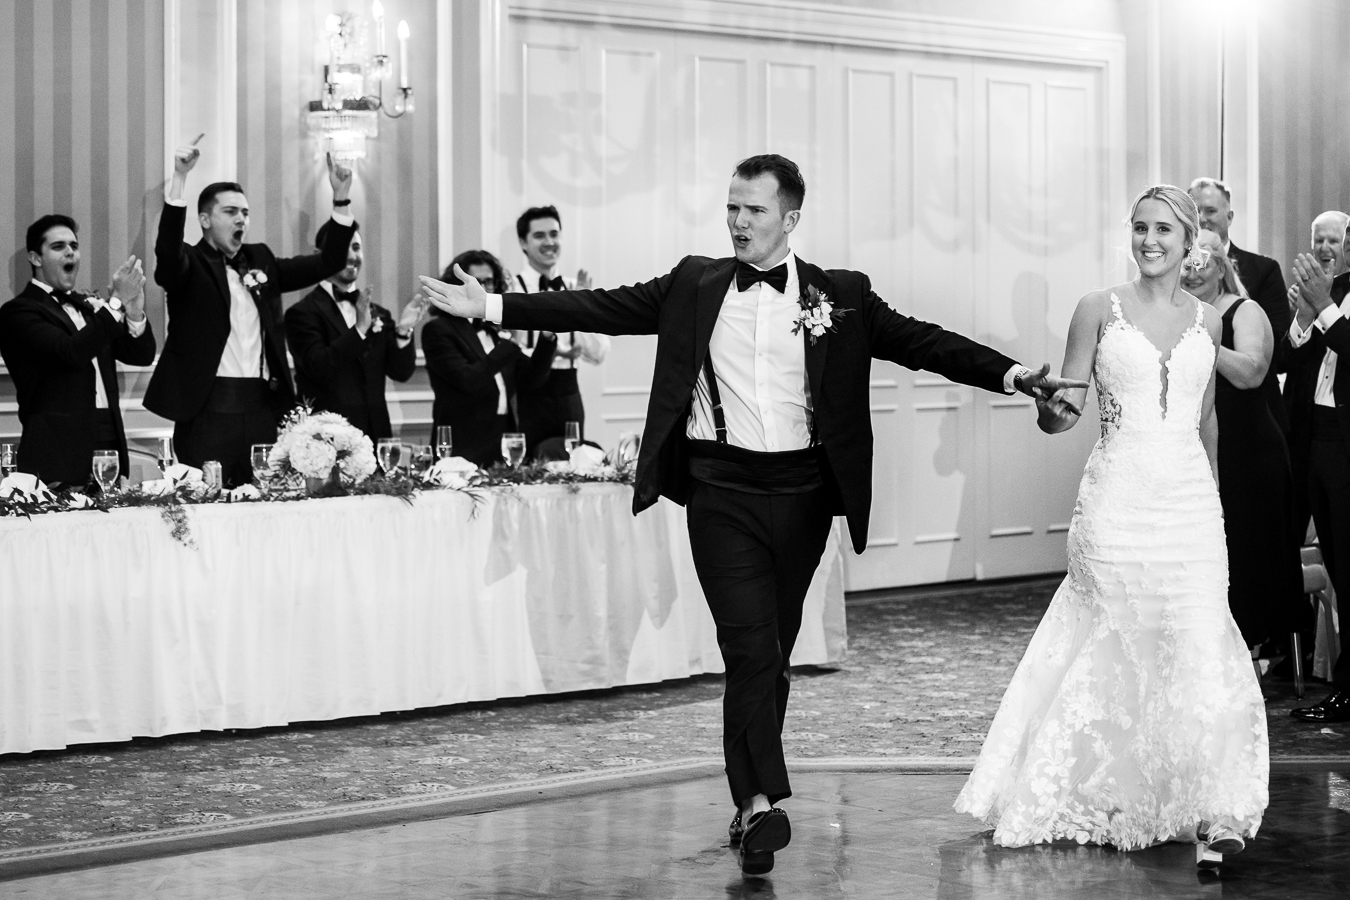 Country Club of York Wedding photographer, lisa rhinehart, captures this black and white image of the bride and groom as they walk into their wedding reception together as everyone is cheering and clapping around them